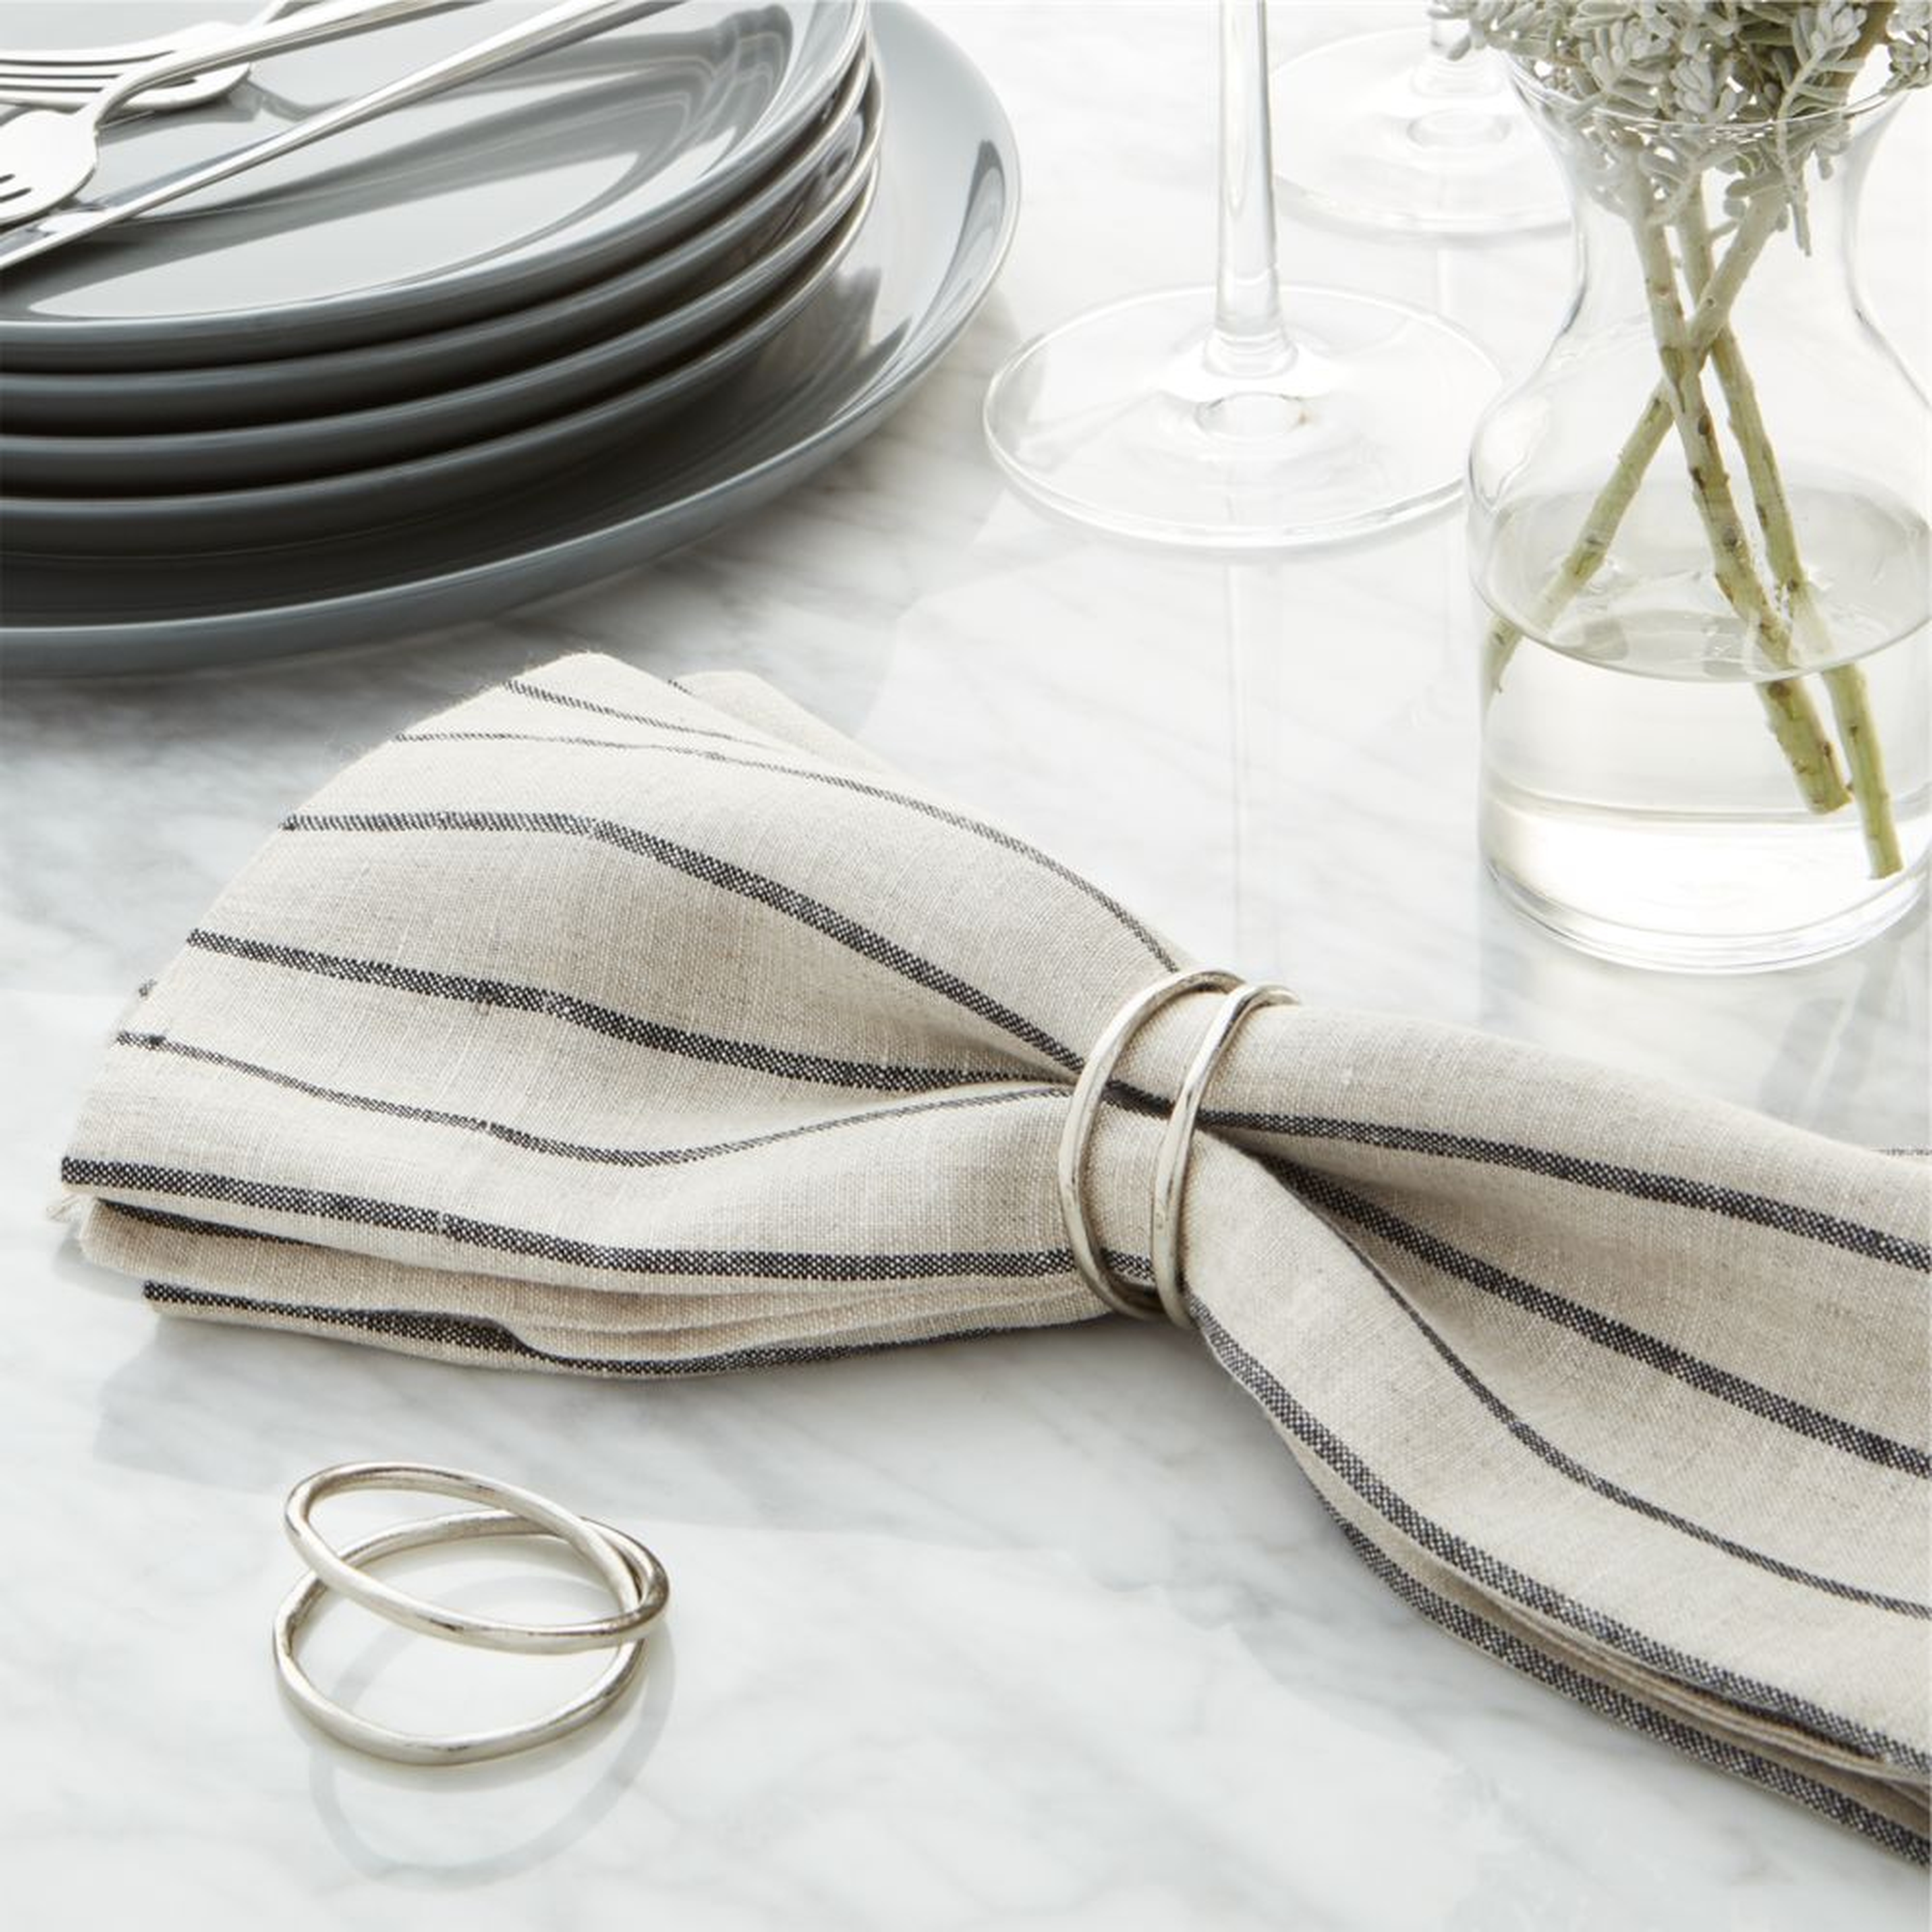 Aria Silver Napkin Ring - Crate and Barrel